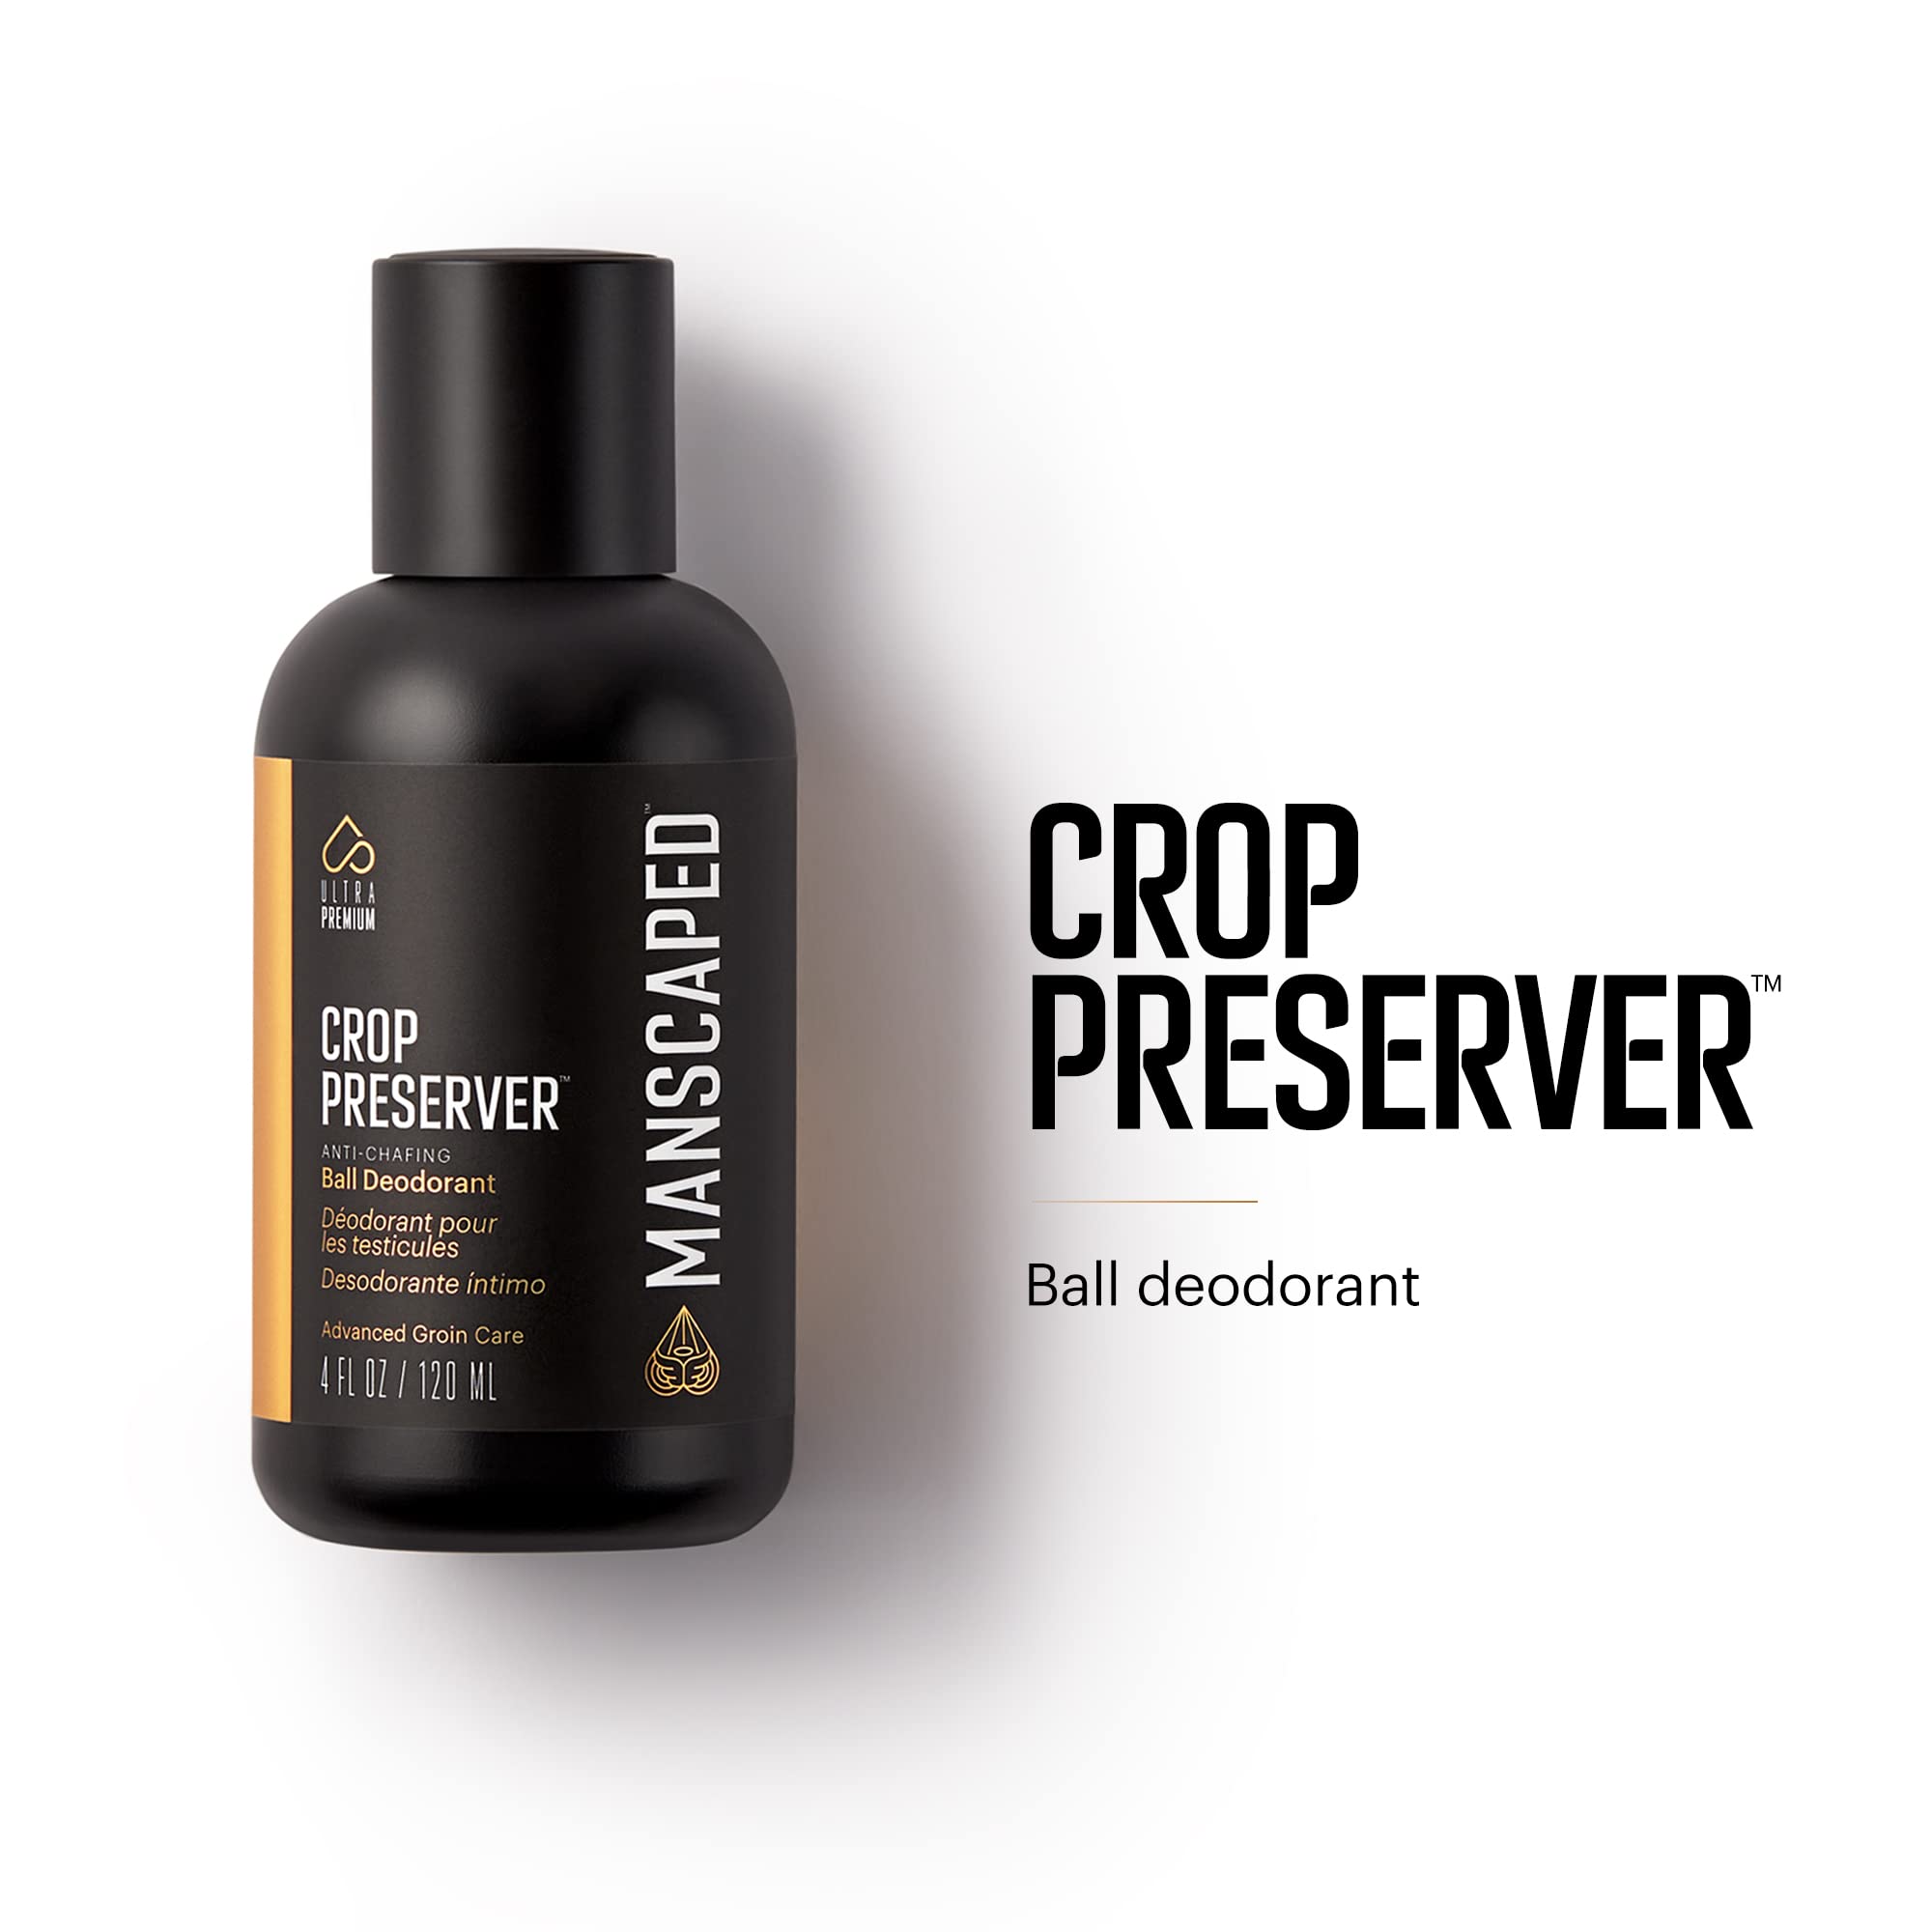 MANSCAPED® Crop Essentials, Male Care Hygiene Bundle, Includes Refined™ Body Wash, Crop Preserver™ Moisturizing Ball Deodorant, Crop Reviver™ Body Toner and Magic Mat™ Disposable Shaving Mats